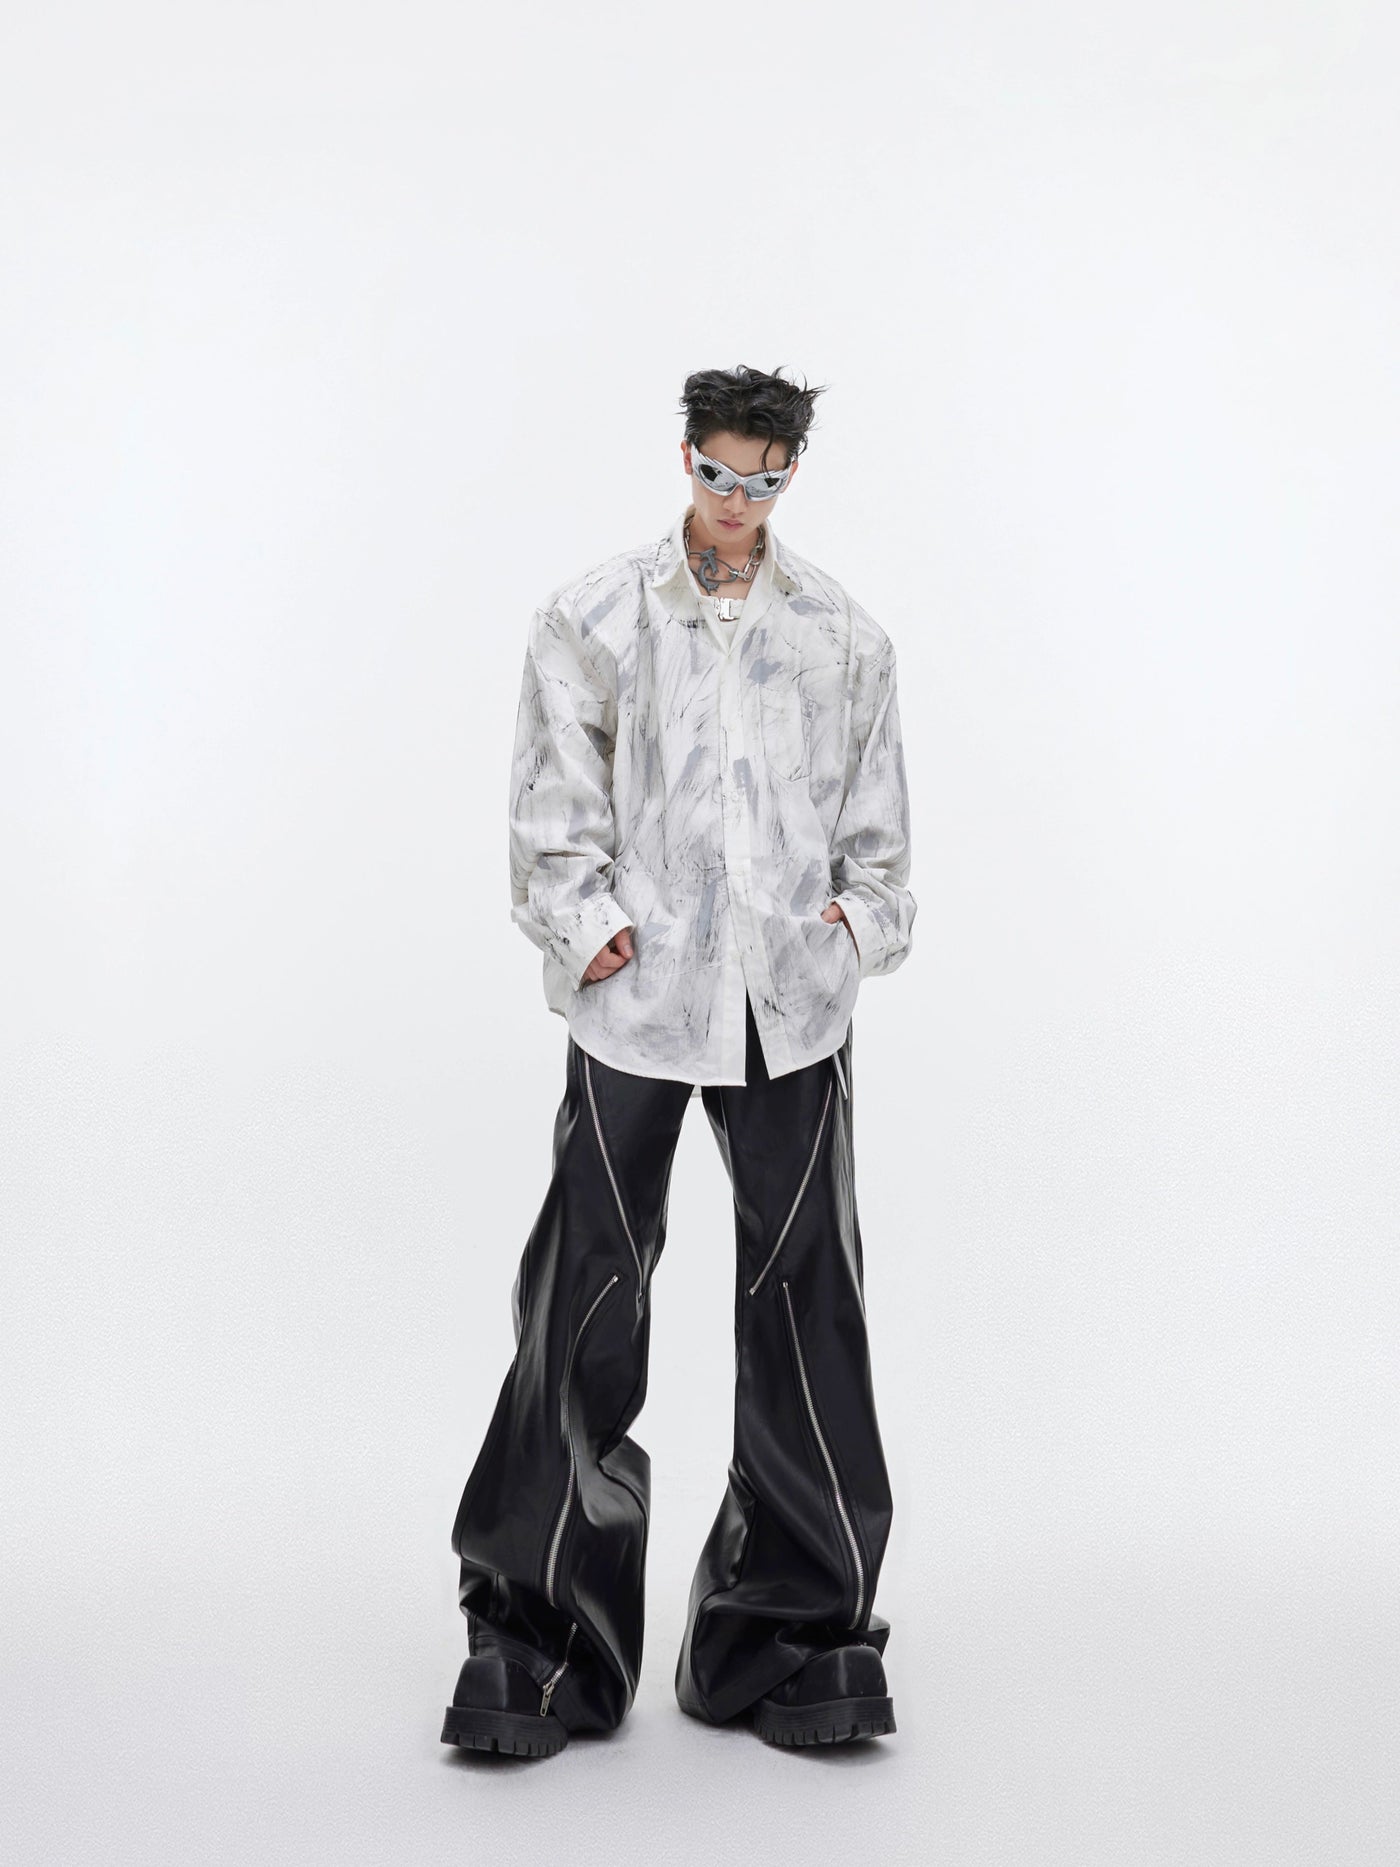 Paint Brushes Boxy Shirt Korean Street Fashion Shirt By Argue Culture Shop Online at OH Vault